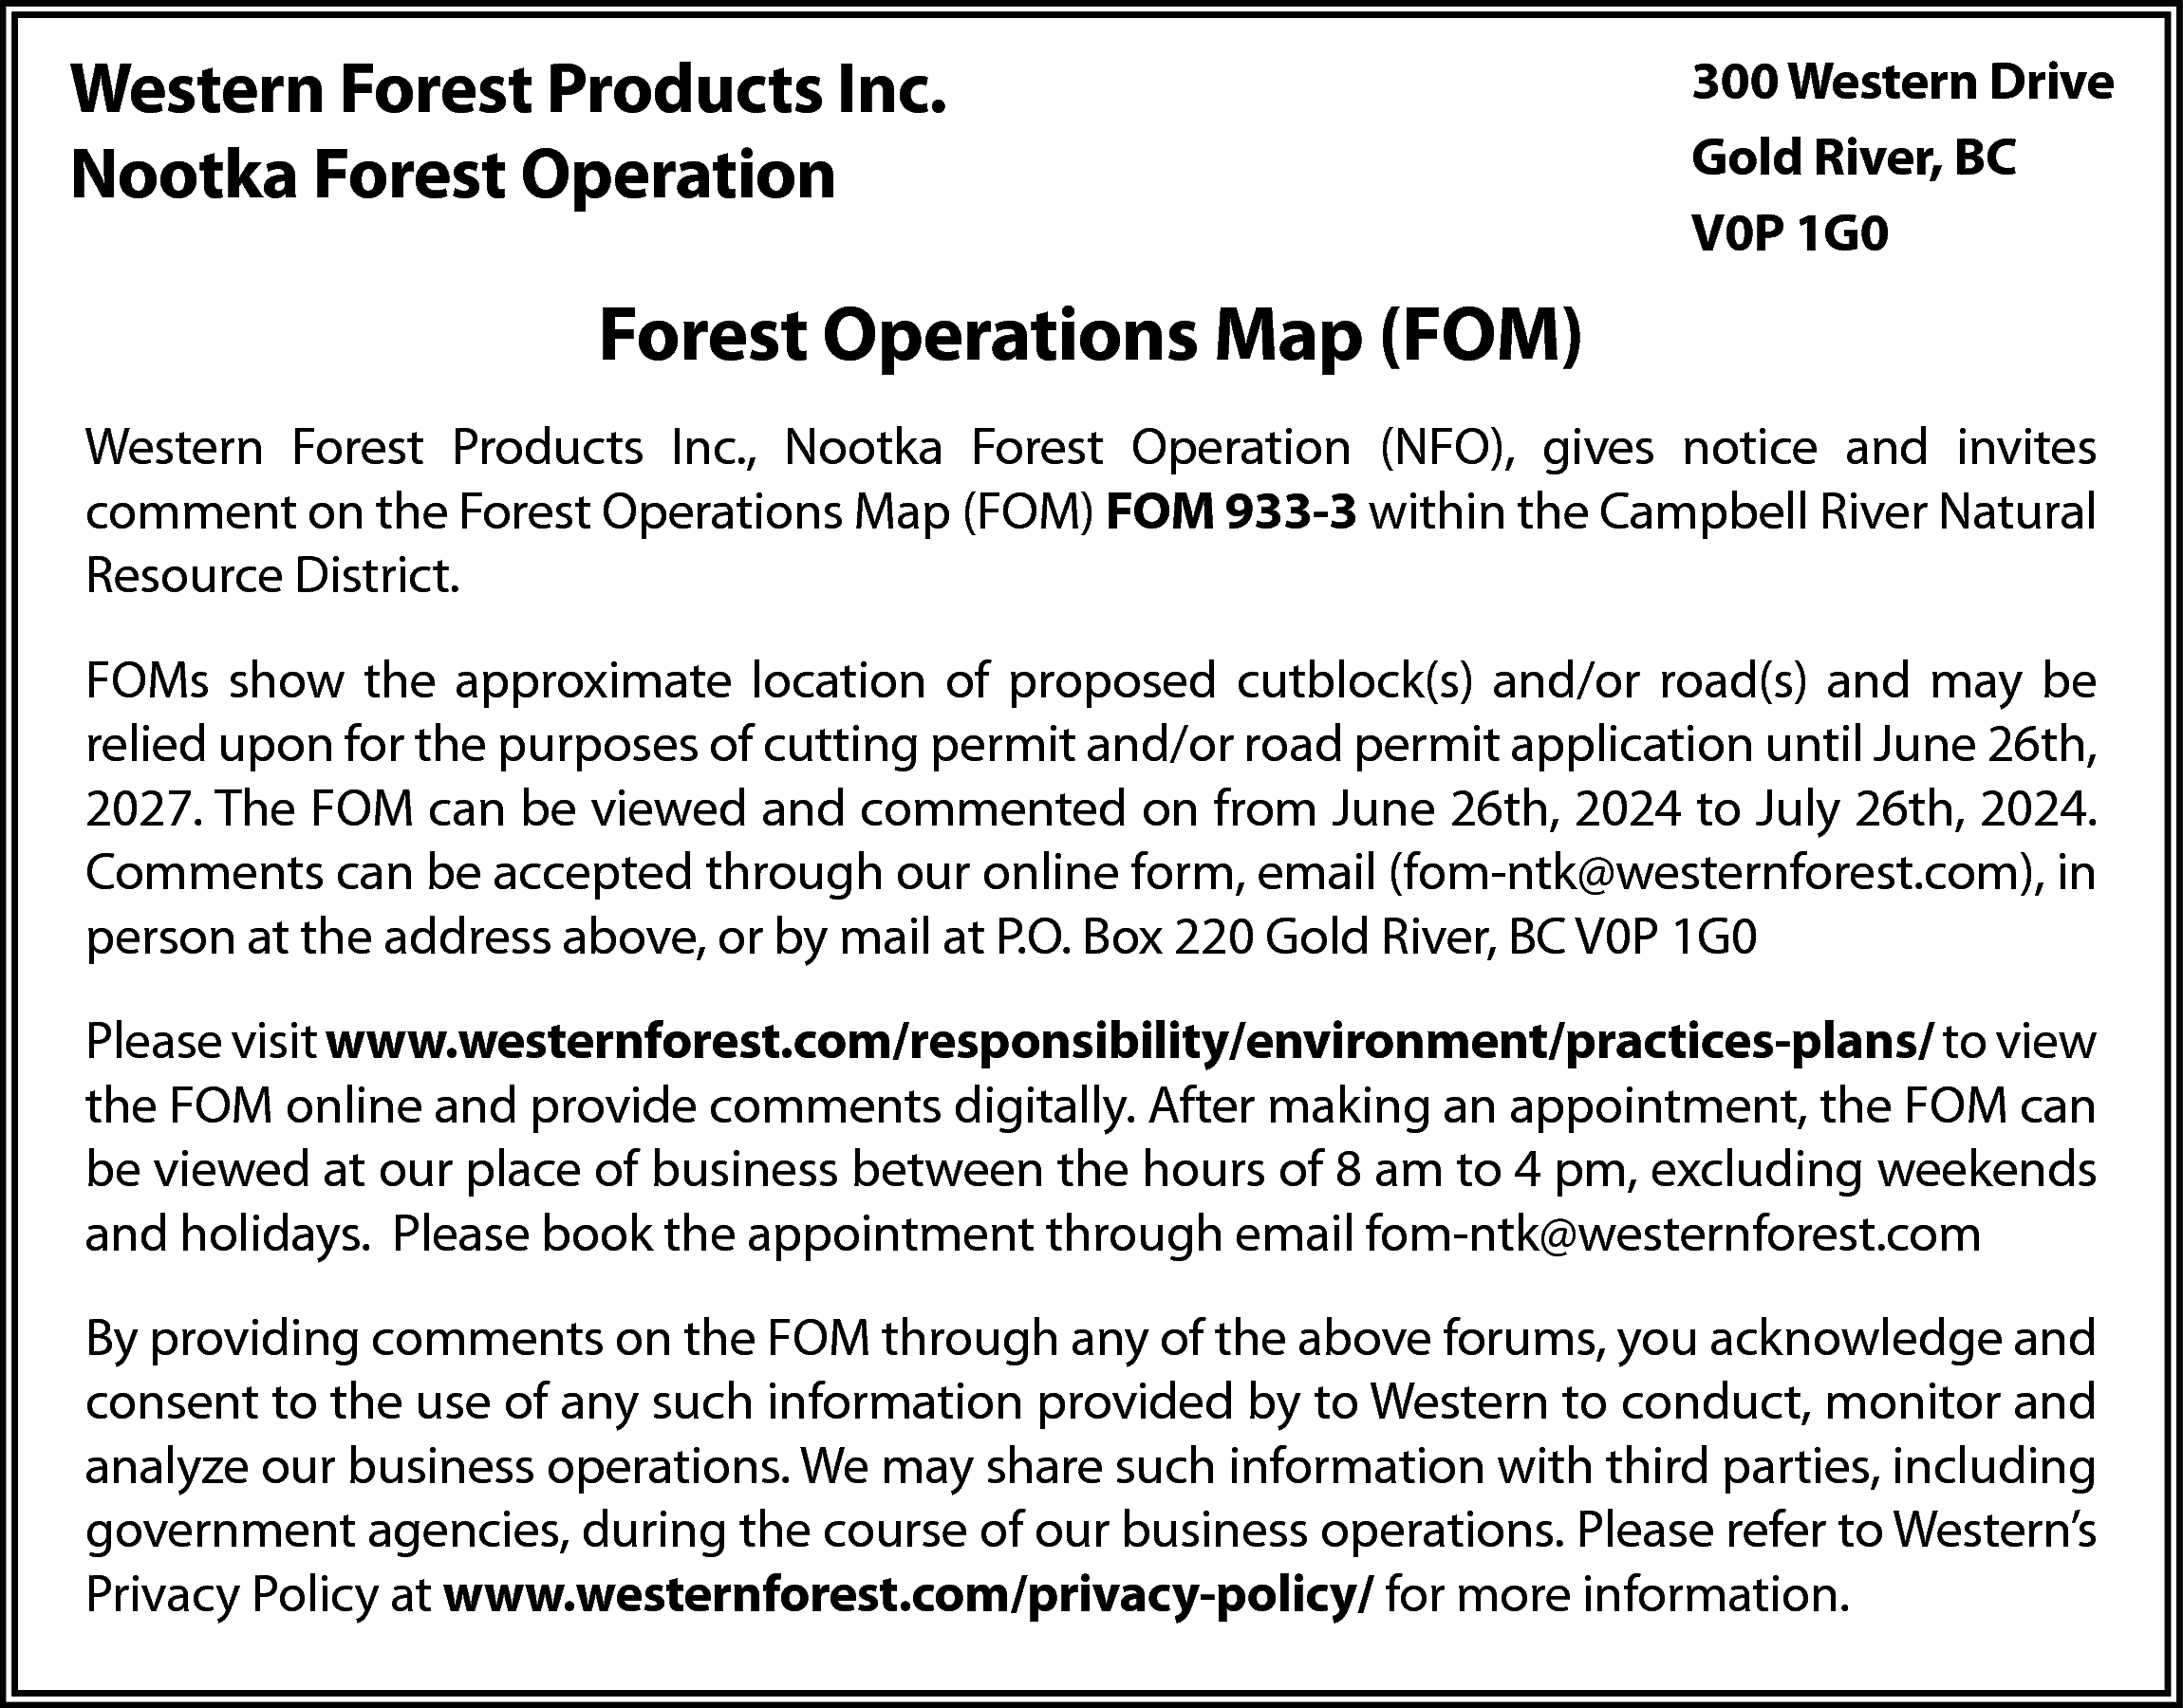 Western Forest Products Inc. <br>Nootka  Western Forest Products Inc.  Nootka Forest Operation    300 Western Drive  Gold River, BC  V0P 1G0    Forest Operations Map (FOM)  Western Forest Products Inc., Nootka Forest Operation (NFO), gives notice and invites  comment on the Forest Operations Map (FOM) FOM 933-3 within the Campbell River Natural  Resource District.  FOMs show the approximate location of proposed cutblock(s) and/or road(s) and may be  relied upon for the purposes of cutting permit and/or road permit application until June 26th,  2027. The FOM can be viewed and commented on from June 26th, 2024 to July 26th, 2024.  Comments can be accepted through our online form, email (fom-ntk@westernforest.com), in  person at the address above, or by mail at P.O. Box 220 Gold River, BC V0P 1G0  Please visit www.westernforest.com/responsibility/environment/practices-plans/ to view  the FOM online and provide comments digitally. After making an appointment, the FOM can  be viewed at our place of business between the hours of 8 am to 4 pm, excluding weekends  and holidays. Please book the appointment through email fom-ntk@westernforest.com  By providing comments on the FOM through any of the above forums, you acknowledge and  consent to the use of any such information provided by to Western to conduct, monitor and  analyze our business operations. We may share such information with third parties, including  government agencies, during the course of our business operations. Please refer to Western’s  Privacy Policy at www.westernforest.com/privacy-policy/ for more information.    